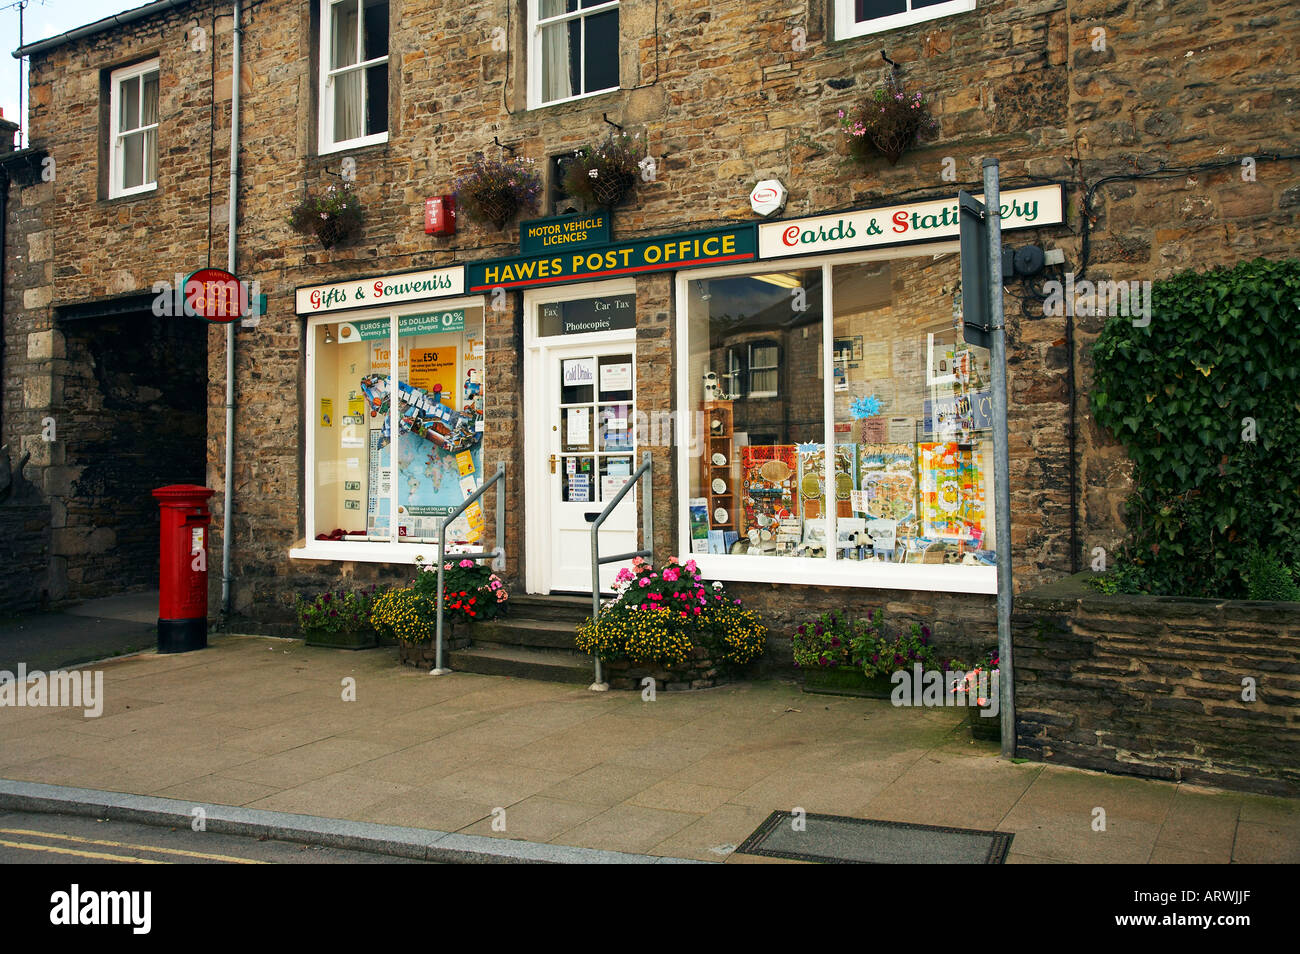 Il Post Office Hawes città mercato Wensleydale Yorkshire Inghilterra Foto Stock